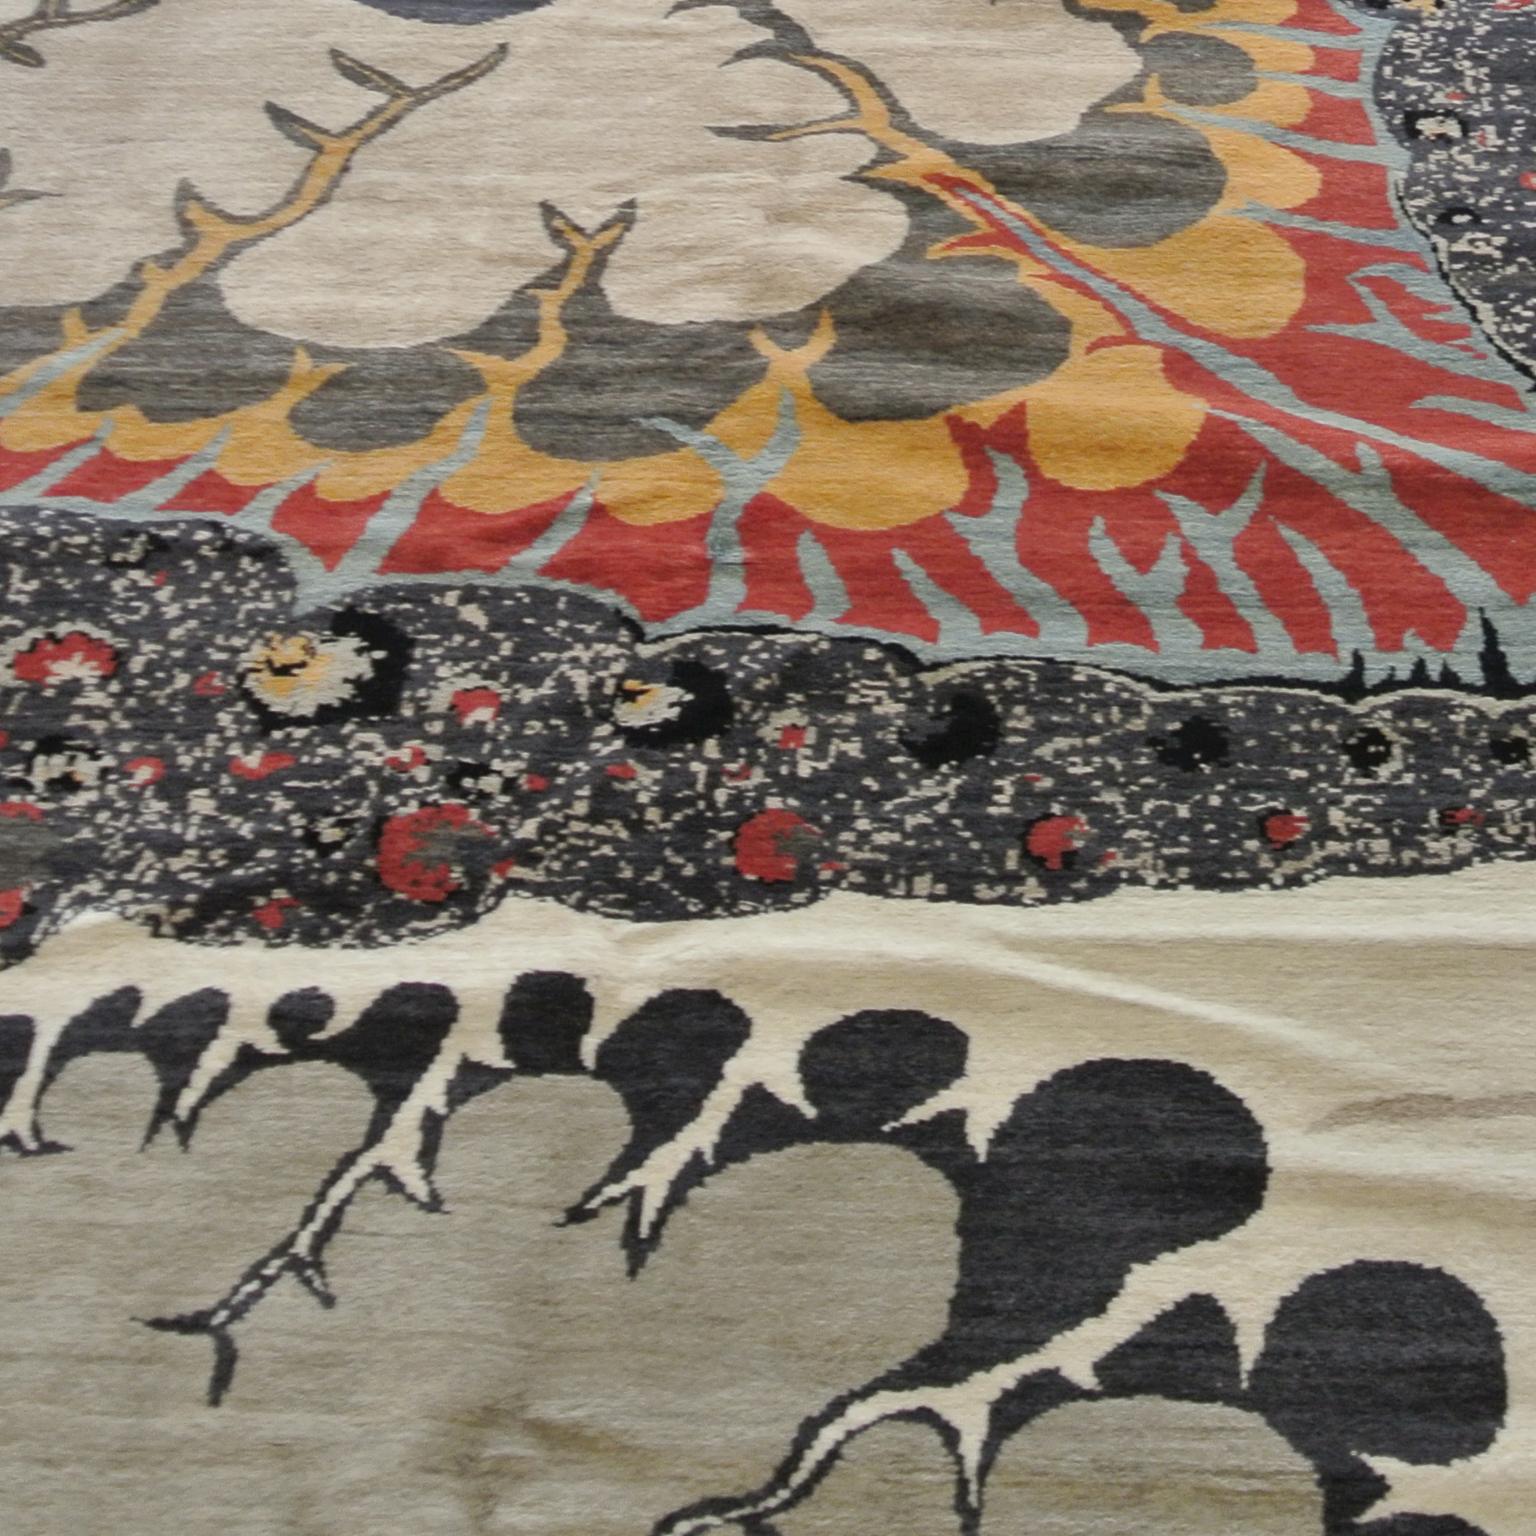 Modern Orley Shabahang Signature “Synergy” Carpet in Pure Handspun Wool, Organic Dyes